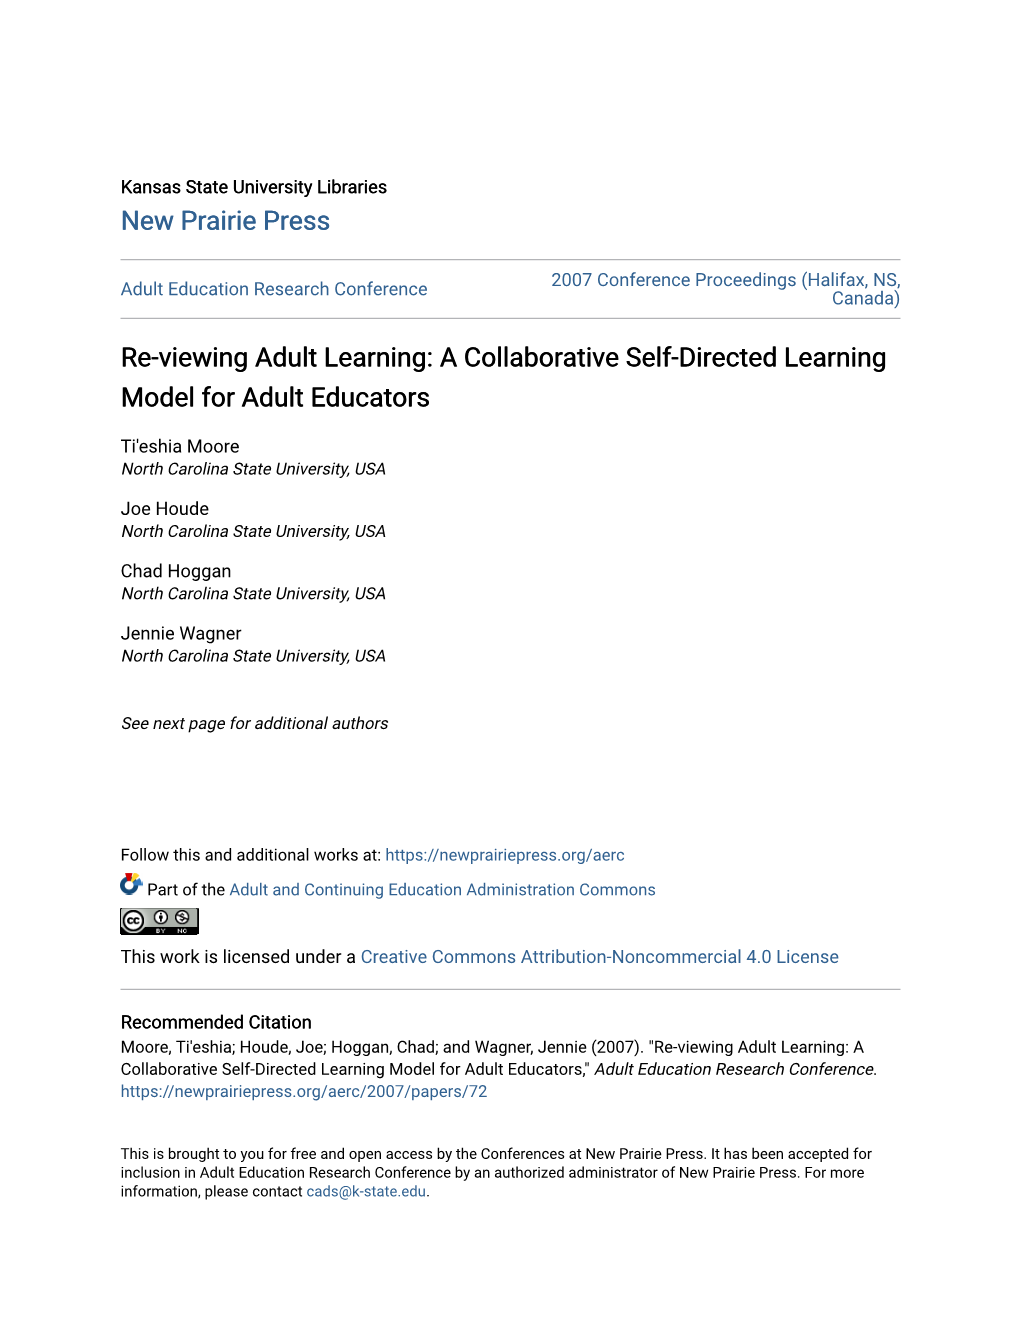 Re-Viewing Adult Learning: a Collaborative Self-Directed Learning Model for Adult Educators